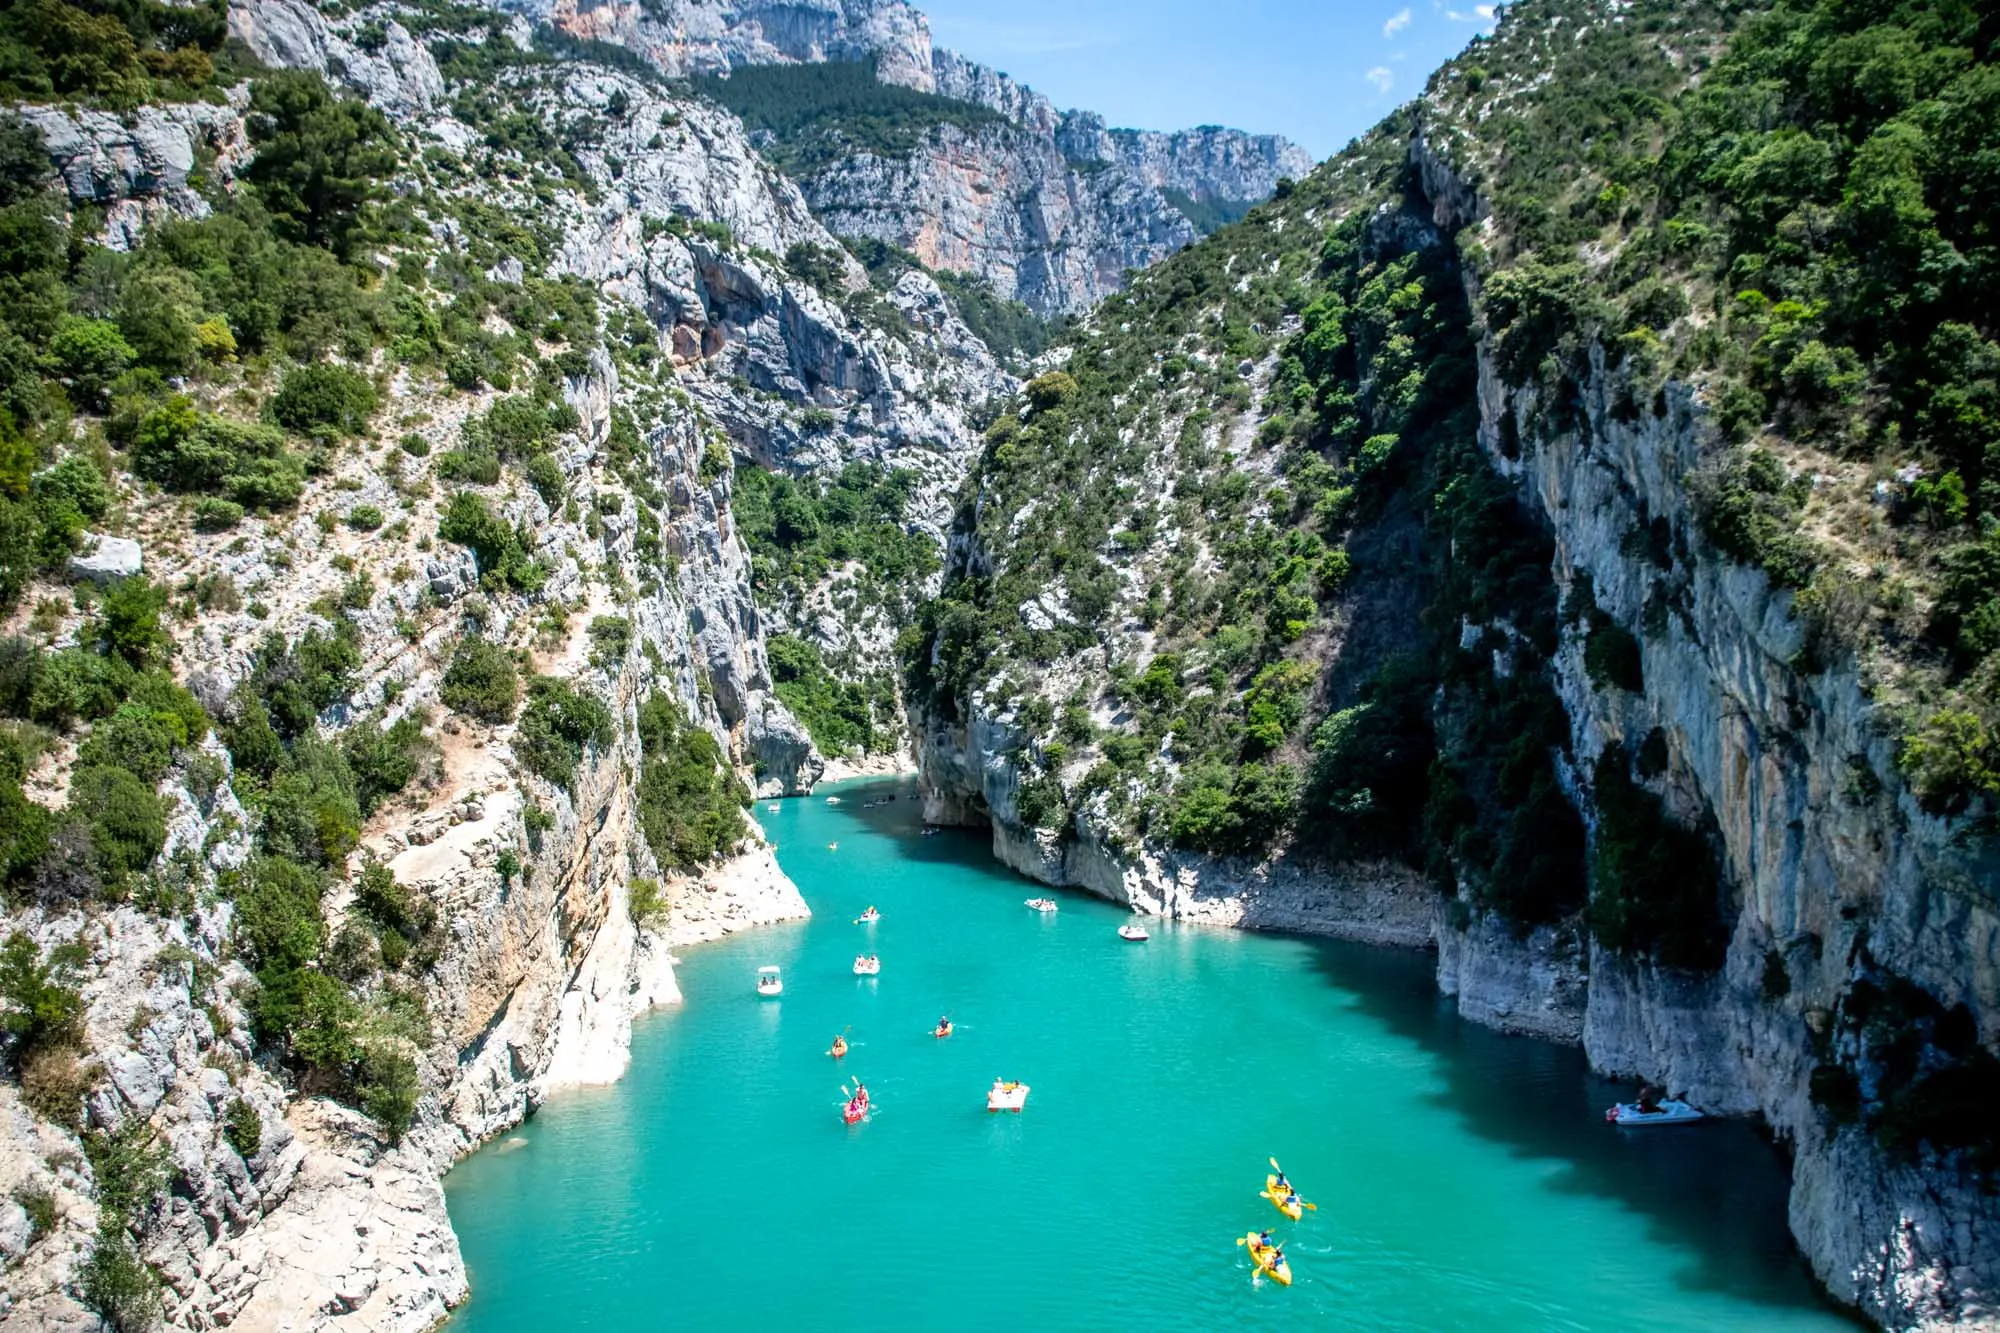 Overhead view of people kayaking in a river gorge surrounded by limestone cliffs